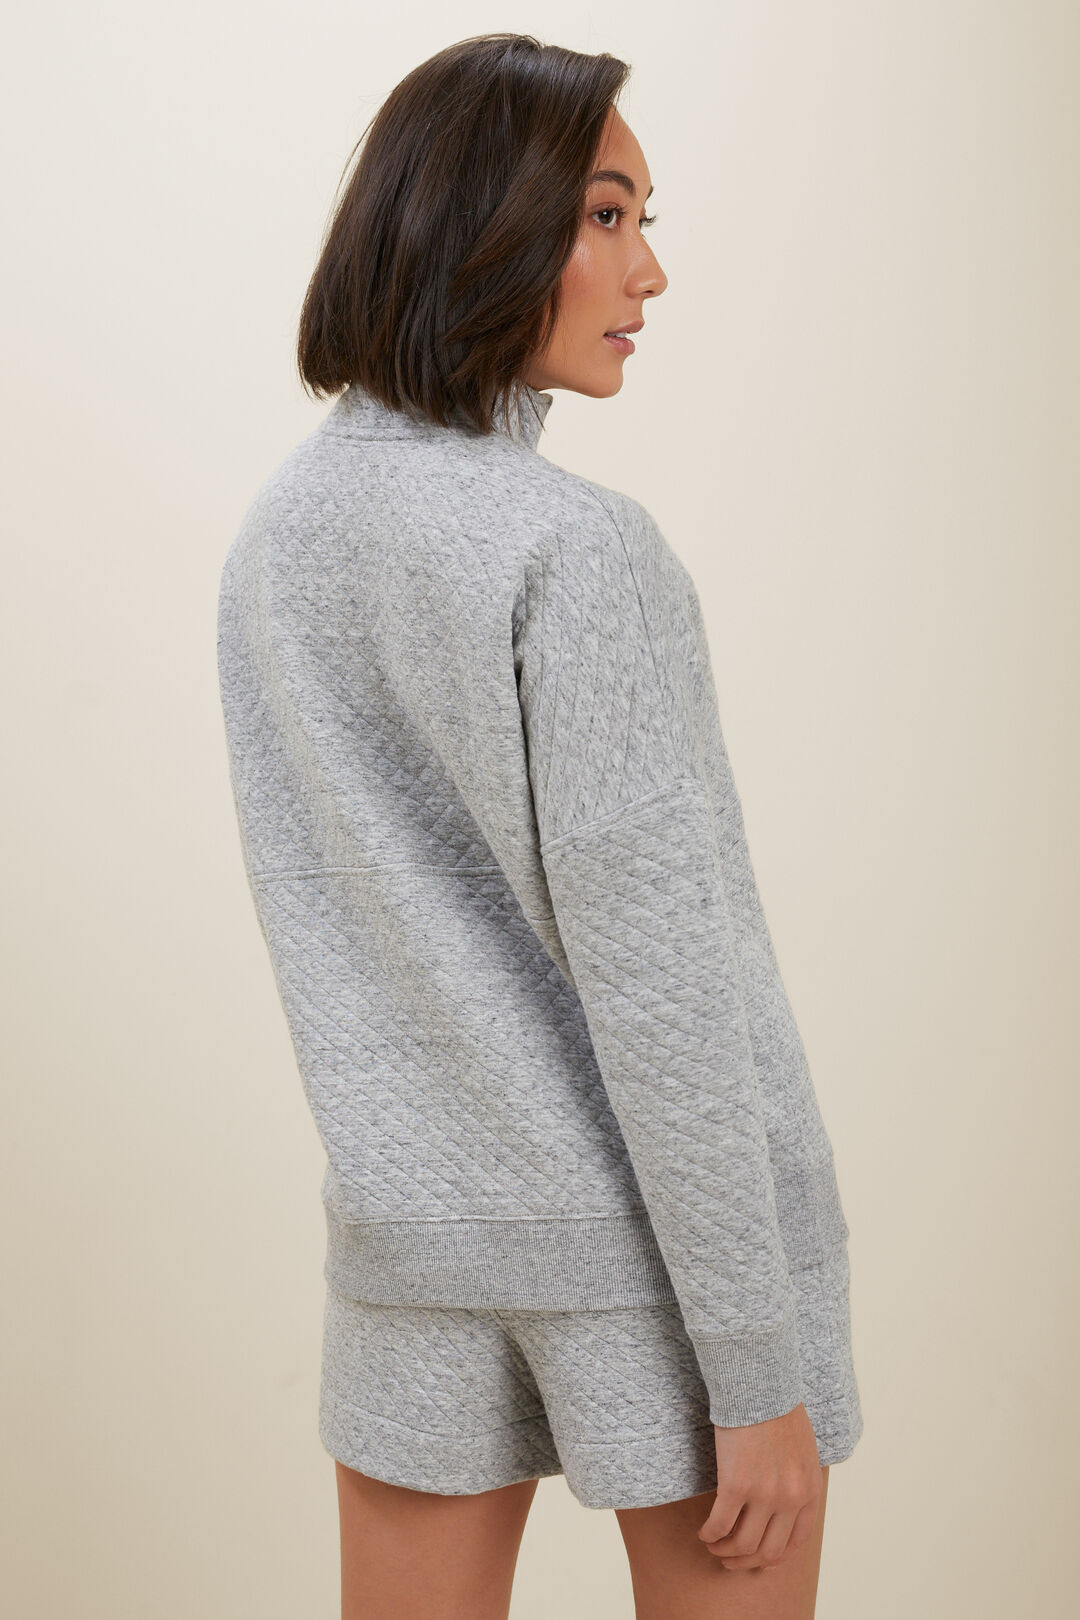 Diamond Quilted Sweater  Stormy Grey Marle  hi-res